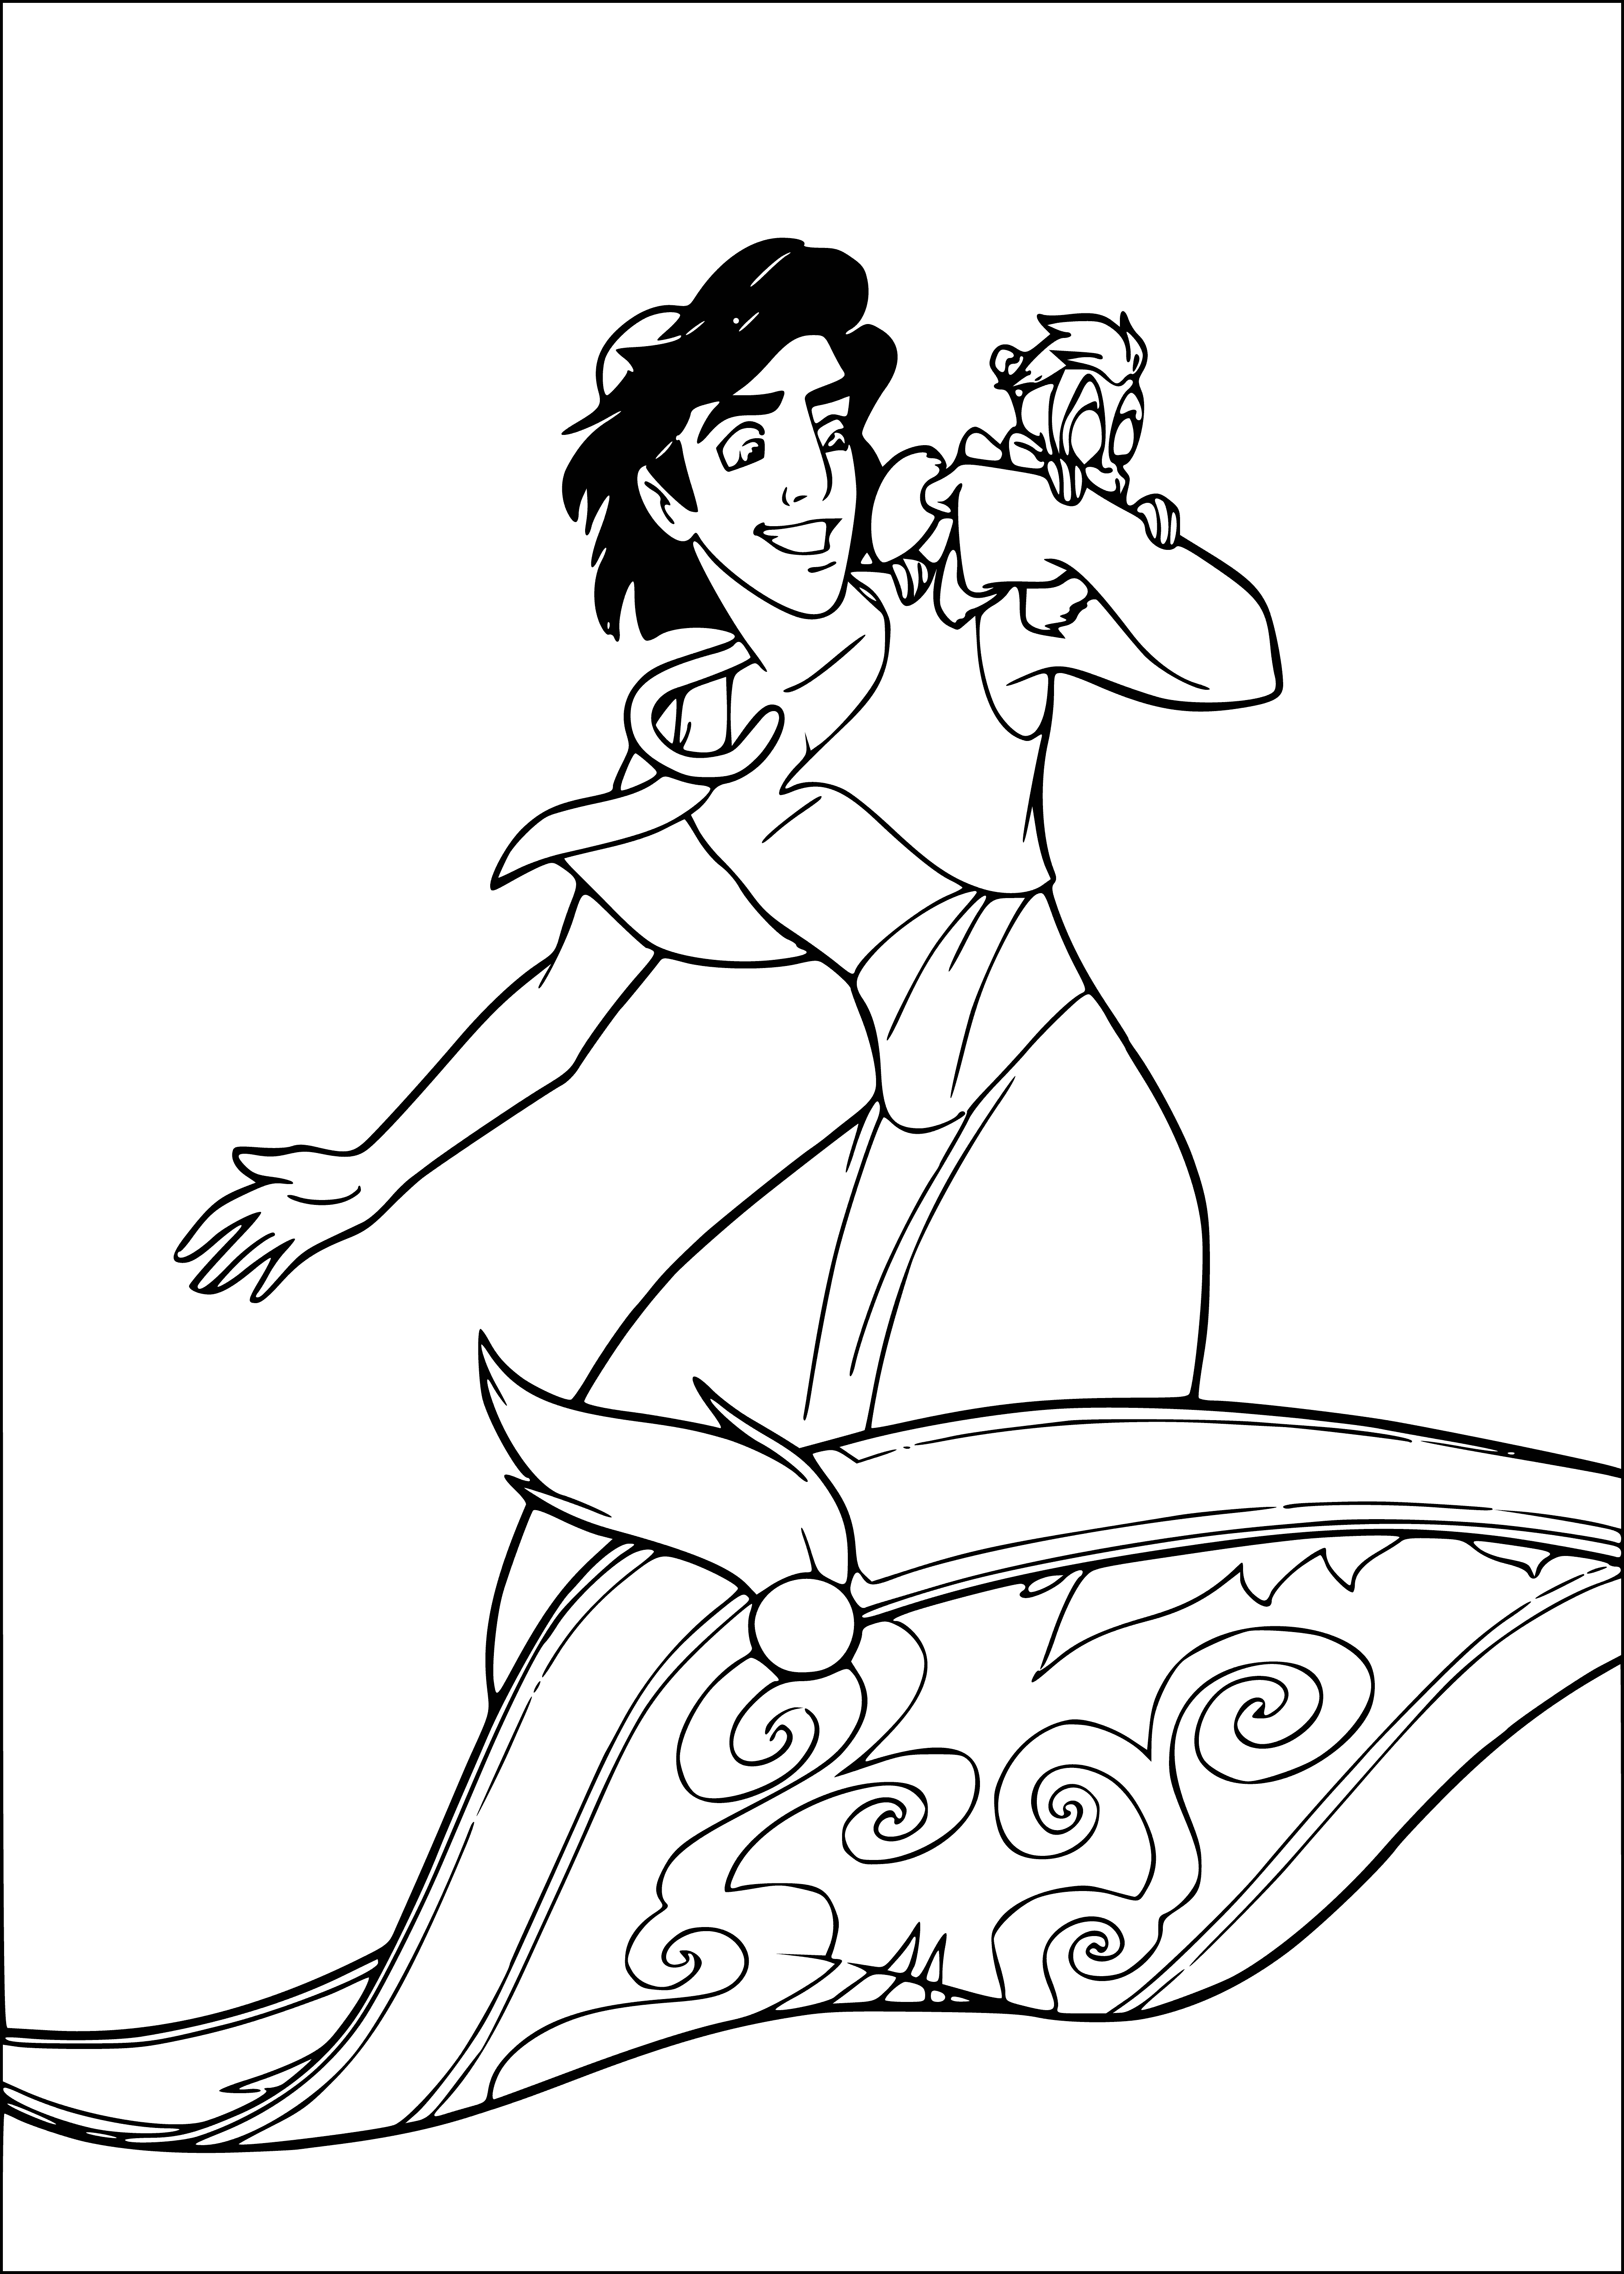 coloring page: Aladdin soars above the ground on a magical carpet, arms outstretched and a big grin on his face. #magic